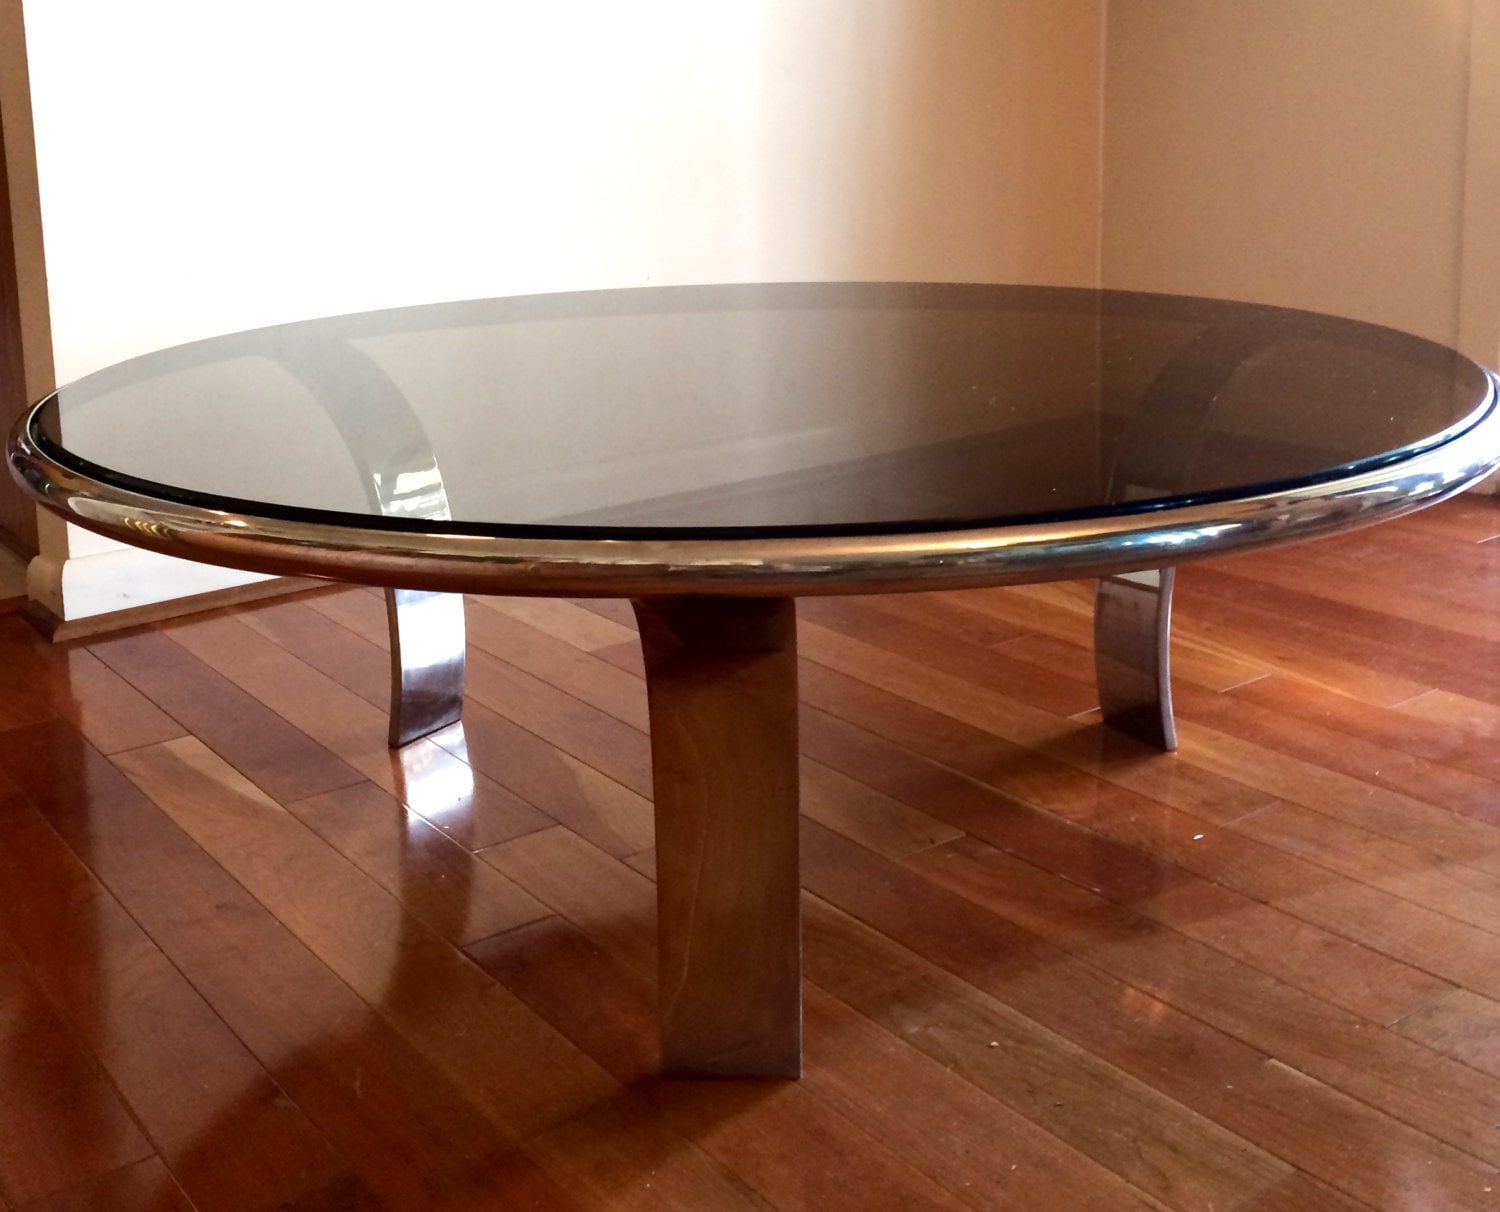 Steelcase Stainless Steel Round Coffee Table